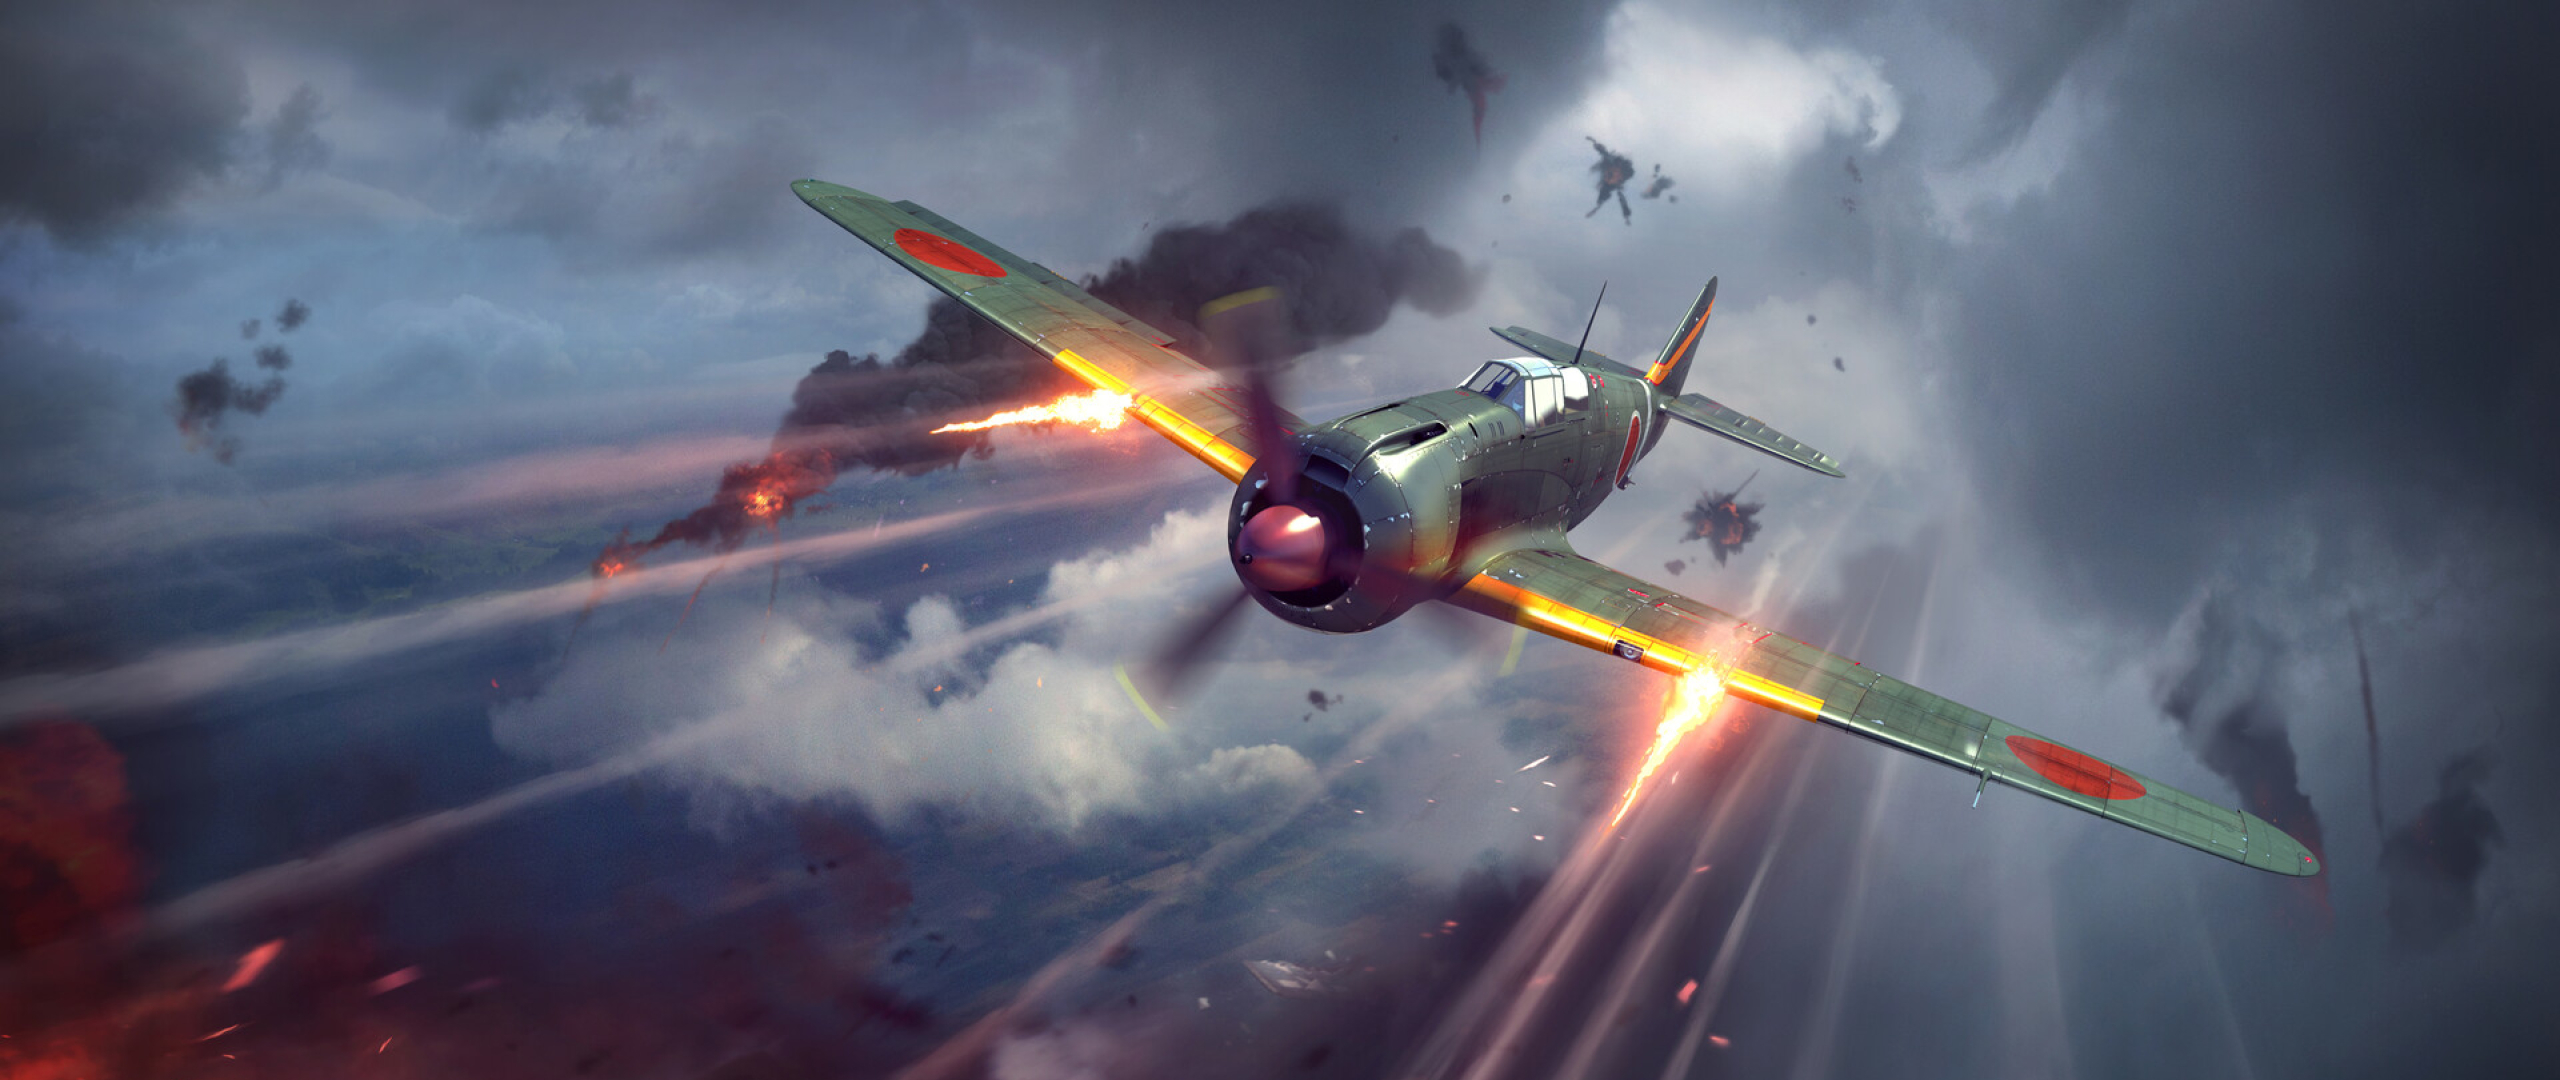 2560x1080 Warplane War Thunder 2560x1080 Resolution Wallpaper Hd Games 4k Wallpapers Images Photos And Background Wallpapers Den